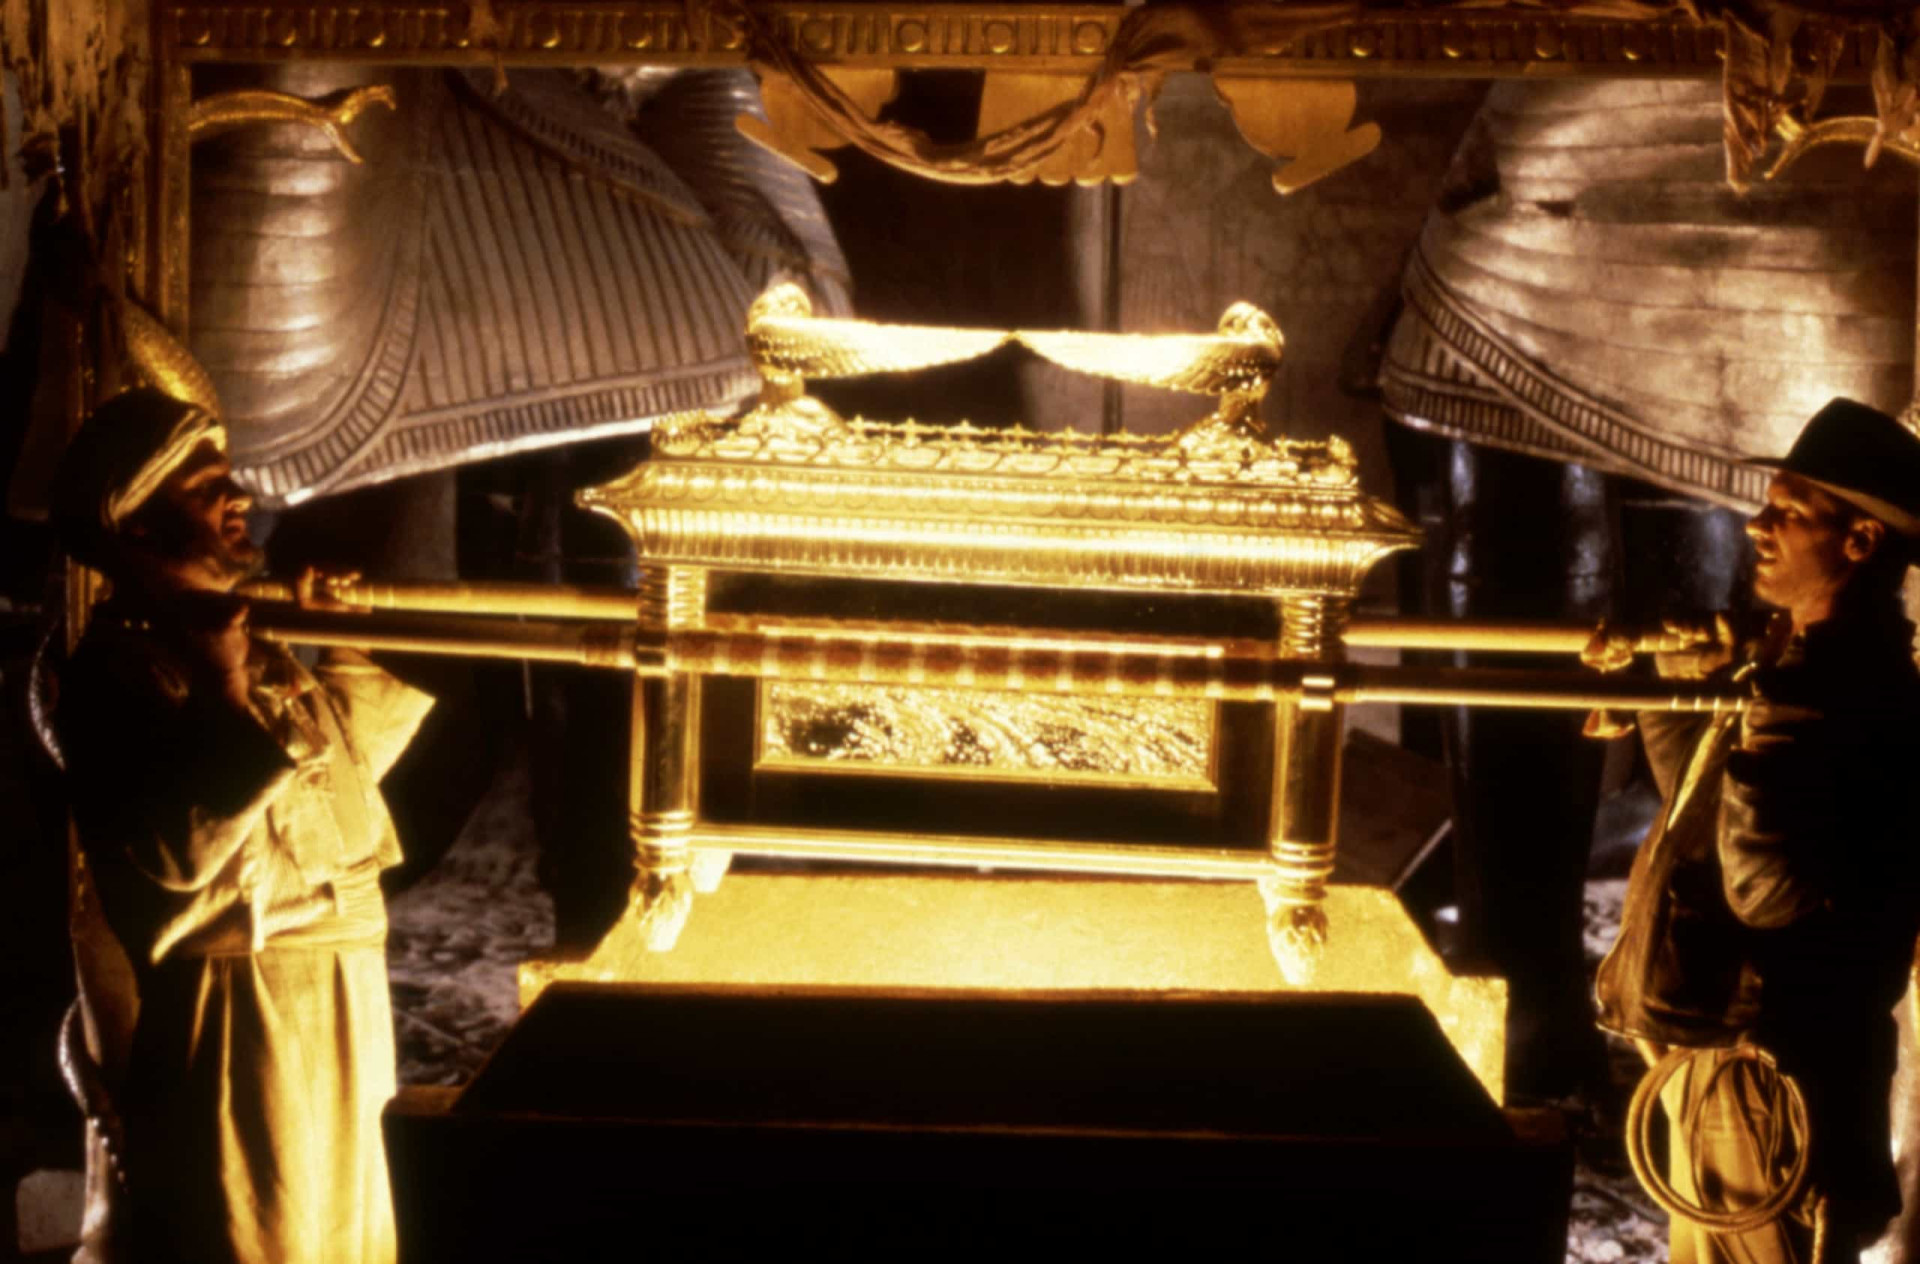 <p>Arguably the most famous quest for archaeology's most misplaced box was on the big screen. In the 1981 movie 'Raiders of the Lost Ark,' Indiana Jones (Harrison Ford) is hired by the US government to find the Ark of the Covenant before Adolf Hitler's Nazis can obtain its awesome powers.</p> <p>Sources: (<a href="https://bible.usccb.org/bible/exodus/0" rel="noopener">Book of Exodus</a>) (<a href="https://www.biblegateway.com/resources/encyclopedia-of-the-bible/Book-Joshua" rel="noopener">Book of Joshua</a>) (<a href="https://www.nationalgeographic.com/history/archaeology/ark-covenant/" rel="noopener">National Geographic</a>) (<a href="https://www.newgrange.com/tara-ark-of-the-covenant.htm" rel="noopener">Newgrange</a>)</p> <p>See also: <a href="https://www.starsinsider.com/lifestyle/352093/decoding-the-symbolism-of-freemasonry">Decoding the symbolism of Freemasonry</a>.</p><p><a href="https://www.msn.com/en-ph/community/channel/vid-7xx8mnucu55yw63we9va2gwr7uihbxwc68fxqp25x6tg4ftibpra?cvid=94631541bc0f4f89bfd59158d696ad7e">Follow us and access great exclusive content every day</a></p>